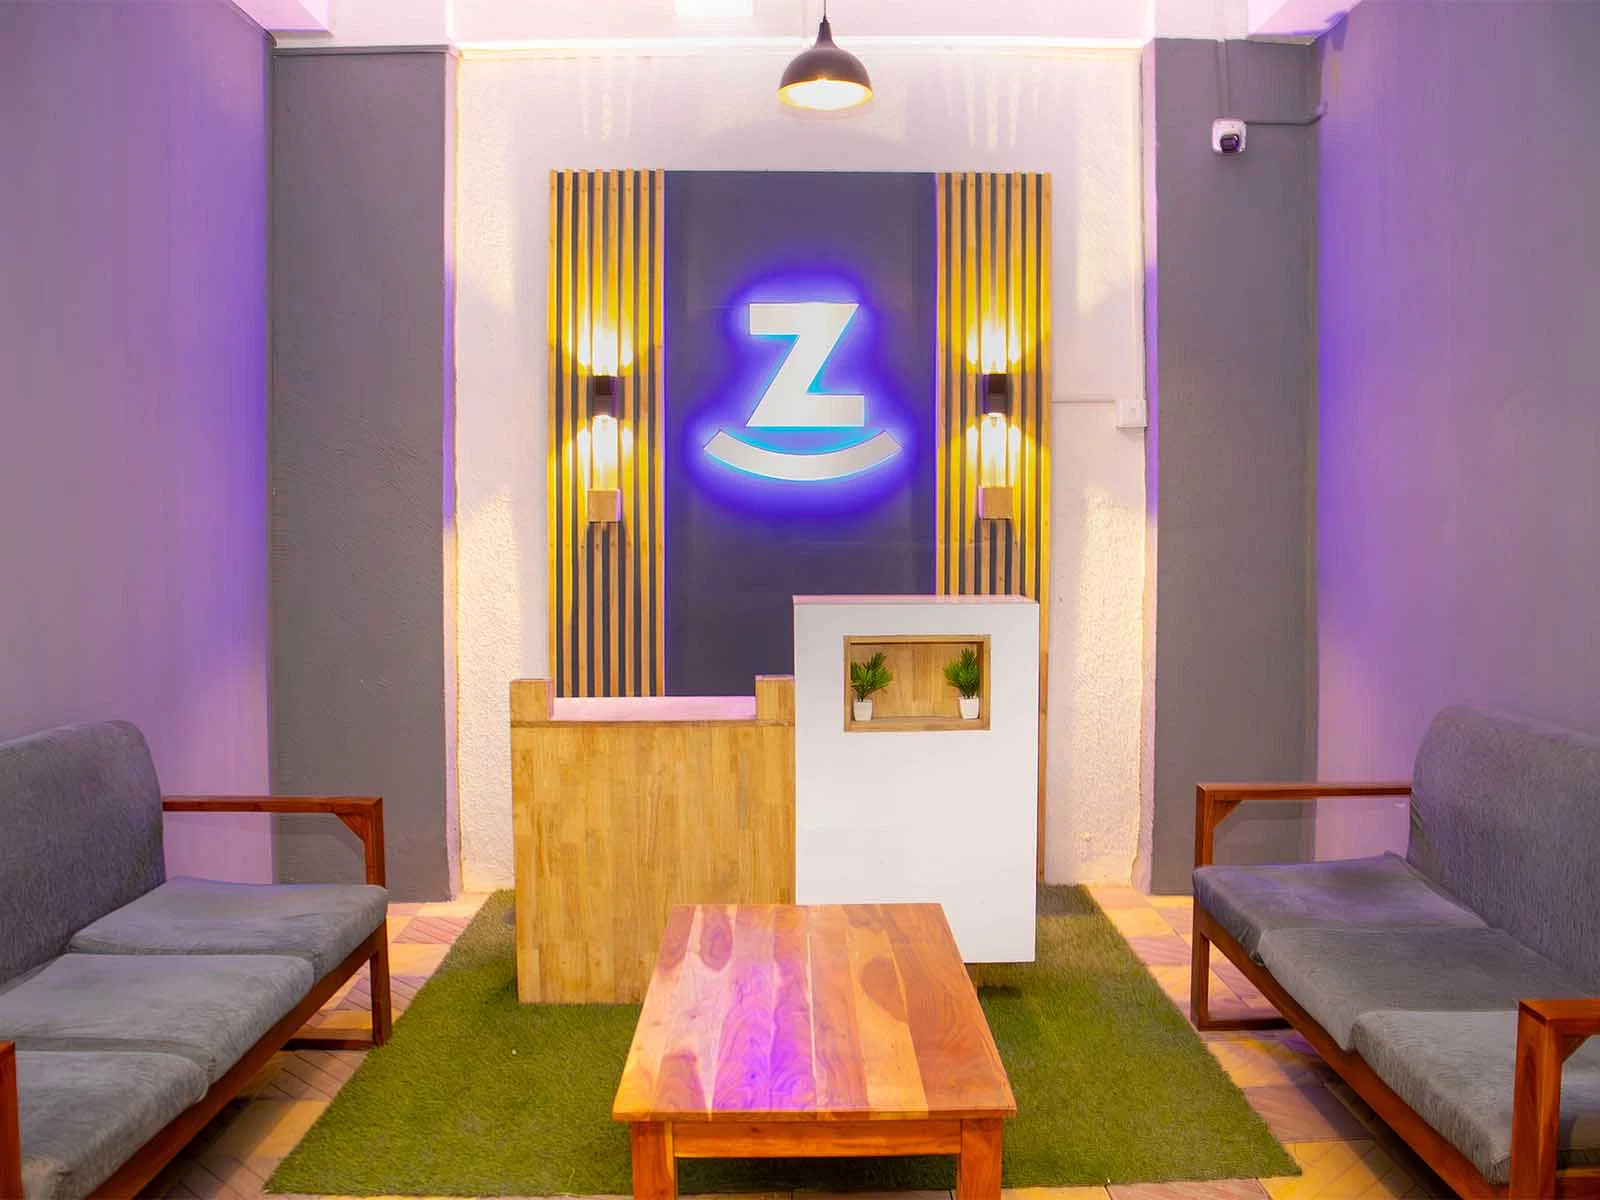 safe and affordable hostels for men and women students with 24/7 security and CCTV surveillance-Zolo Wisteria